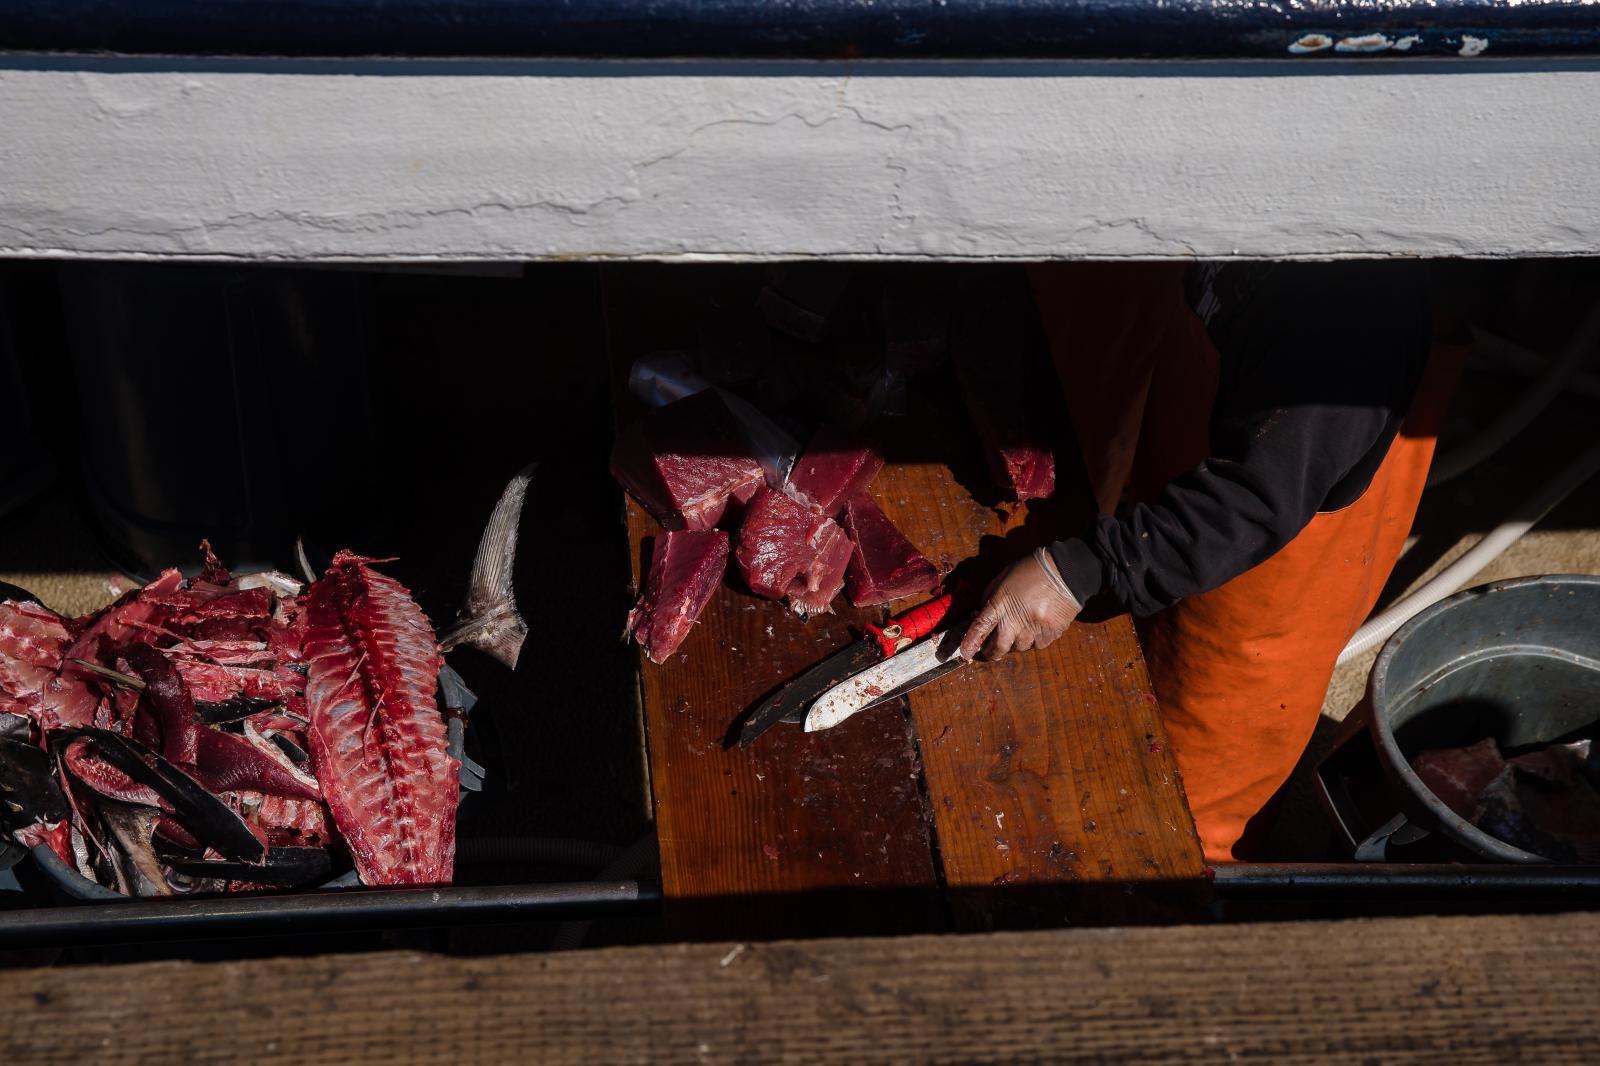 Image from United States - A fisherman cuts fish on the Pacific Horizon fishing...